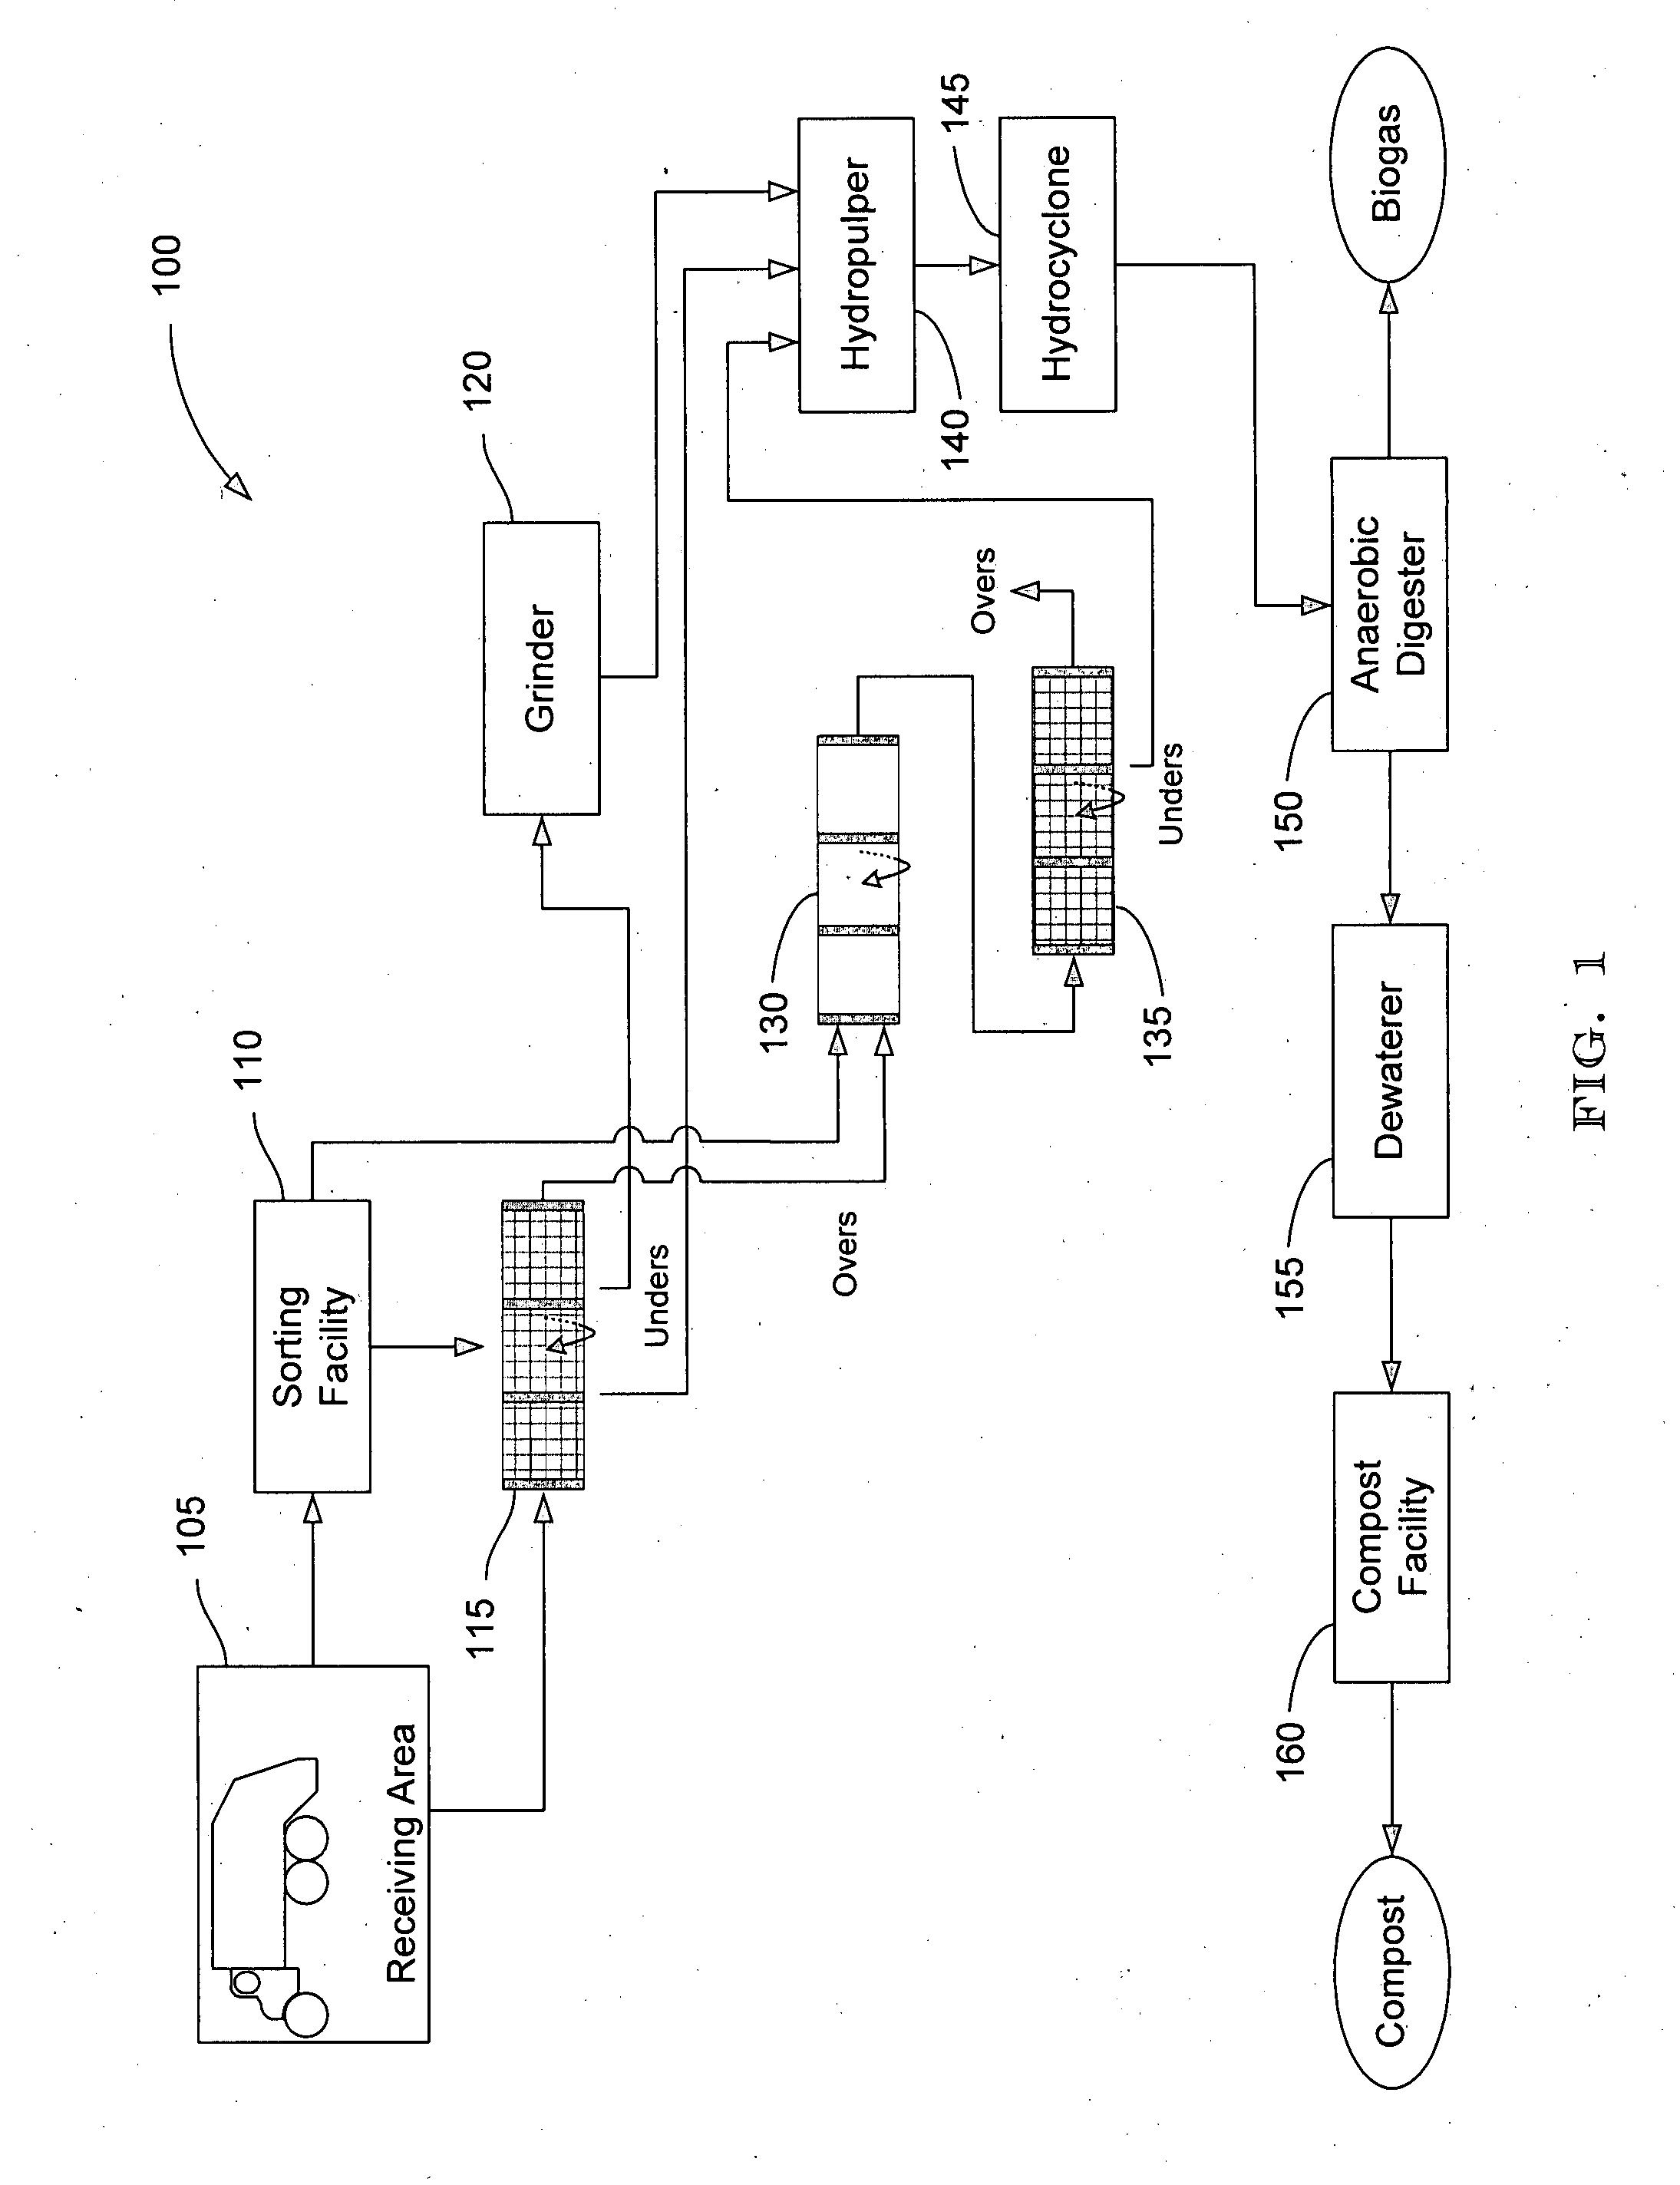 Systems and methods for converting organic waste materials into useful products